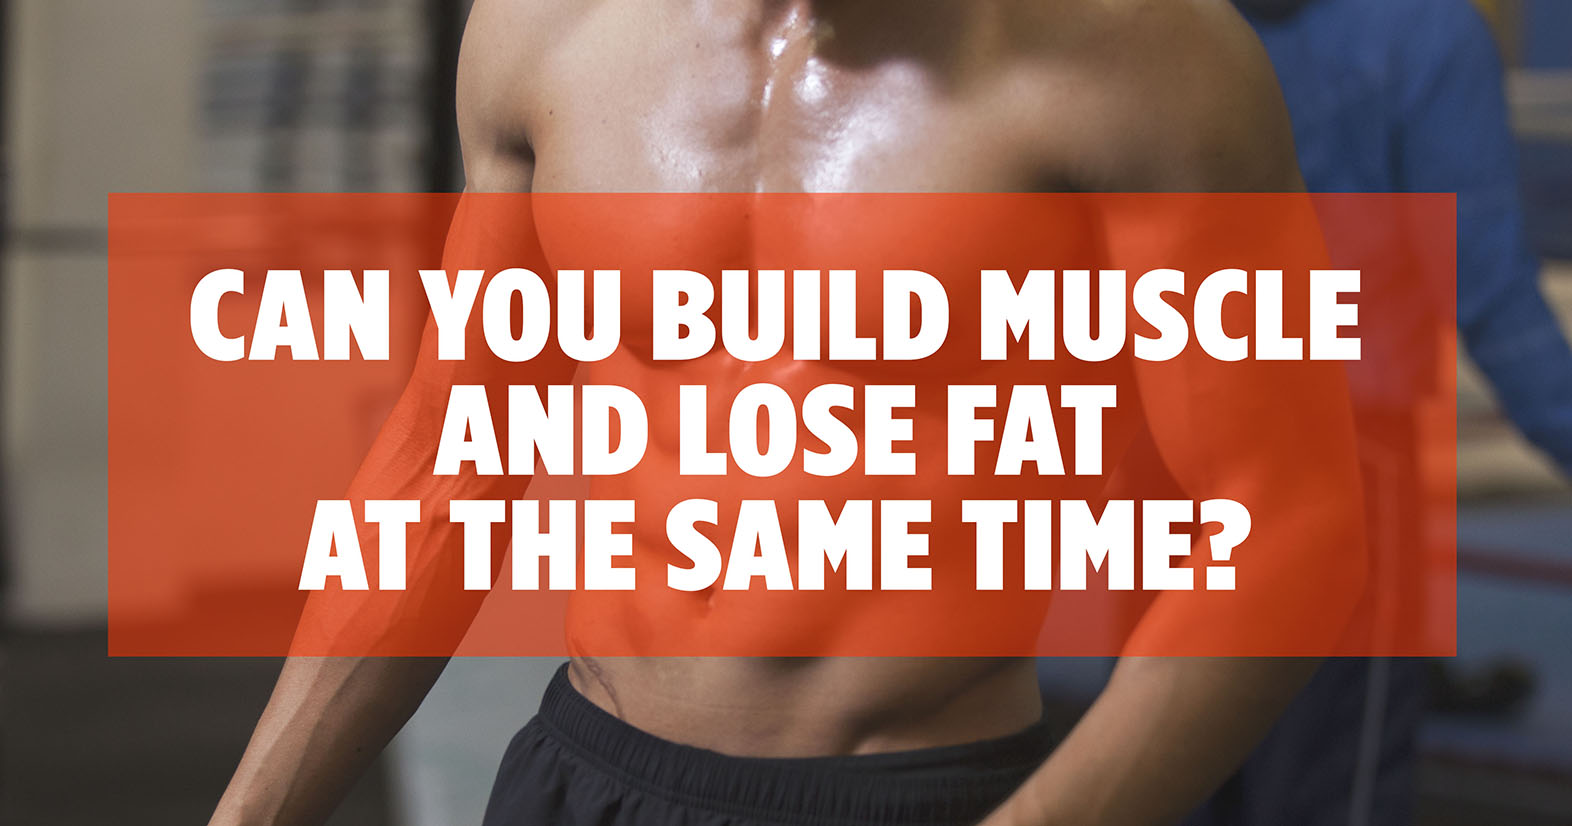 You Build Muscle And Lose Fat At The Time?